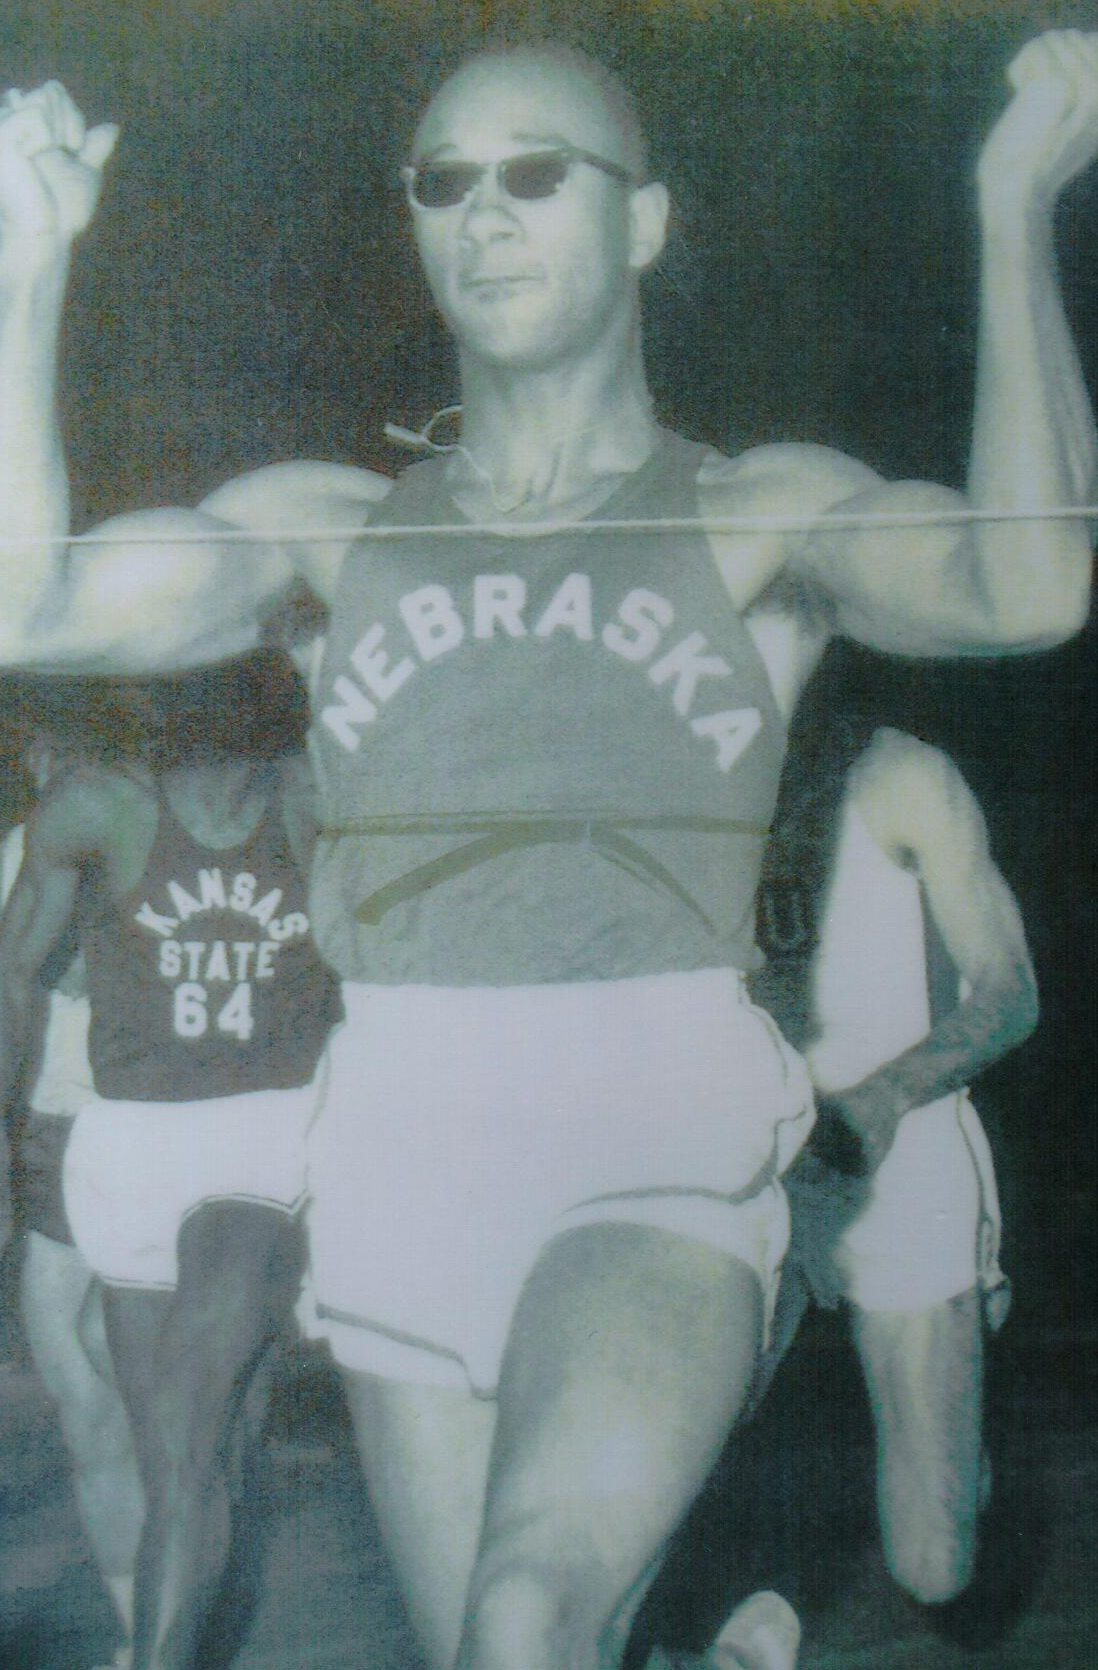 Charles Green, 1968 Olympic athlete.